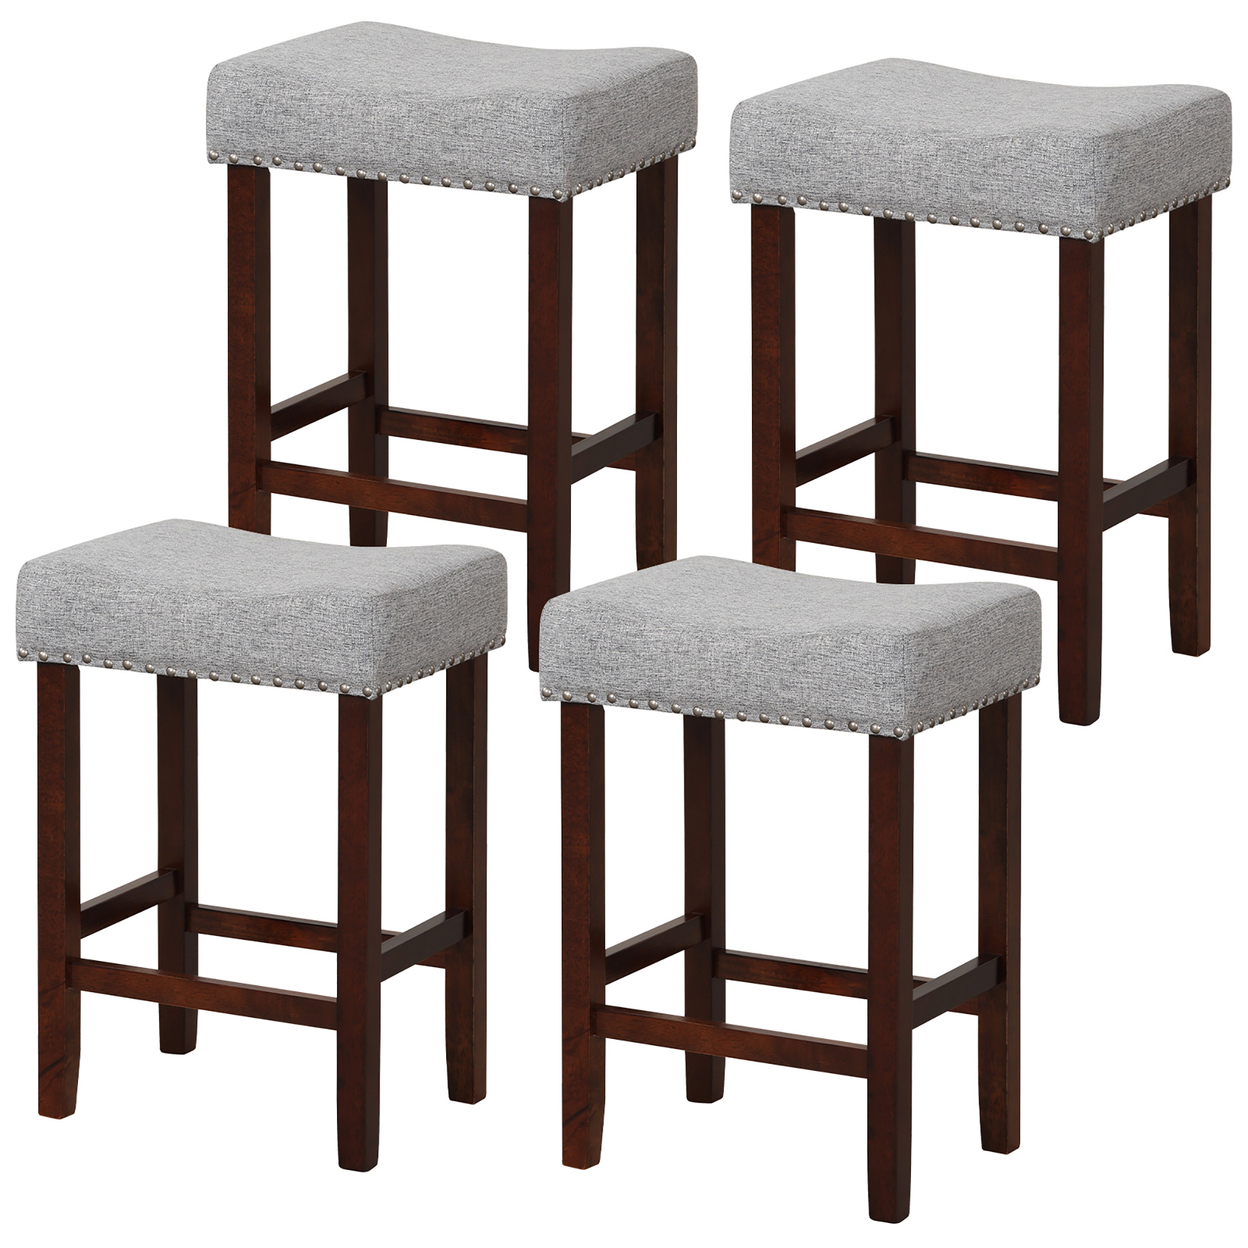 Set Of 4 Bar Stools Counter Height Saddle Kitchen Chairs W/ Wooden Legs - Gray + Brown